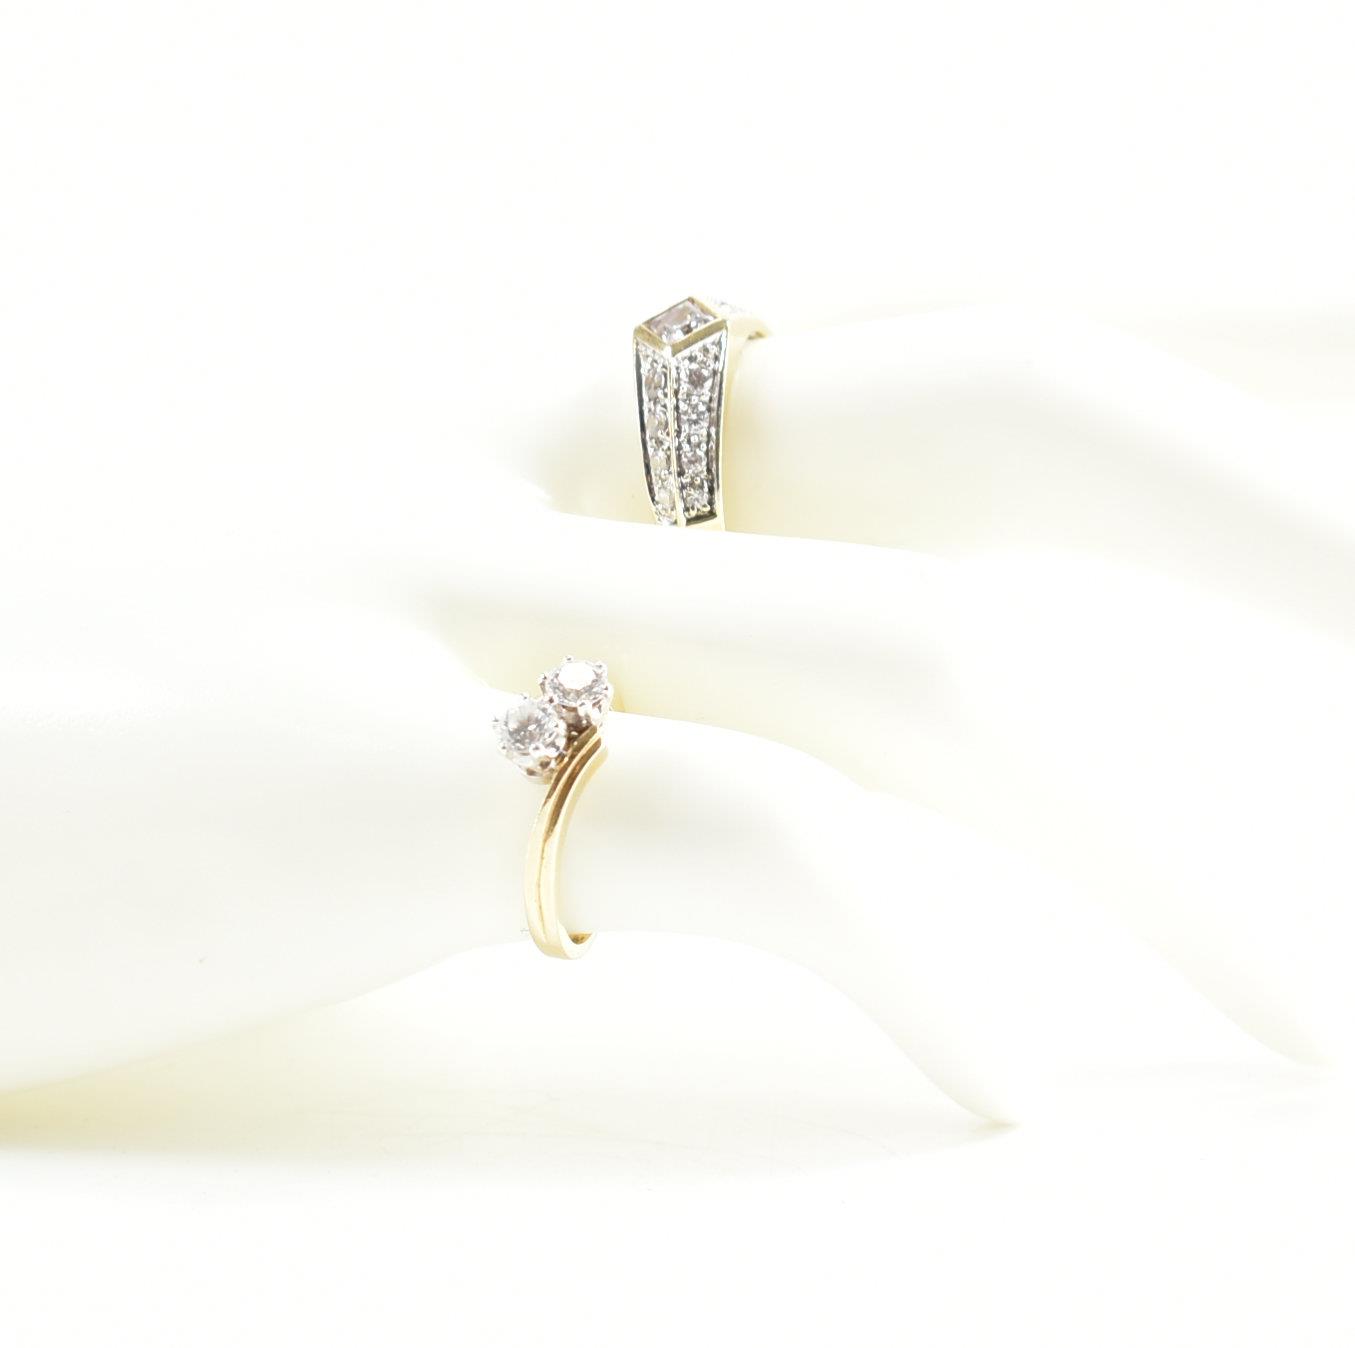 TWO HALLMARKED 14CT GOLD & CZ DRESS RINGS - Image 10 of 10